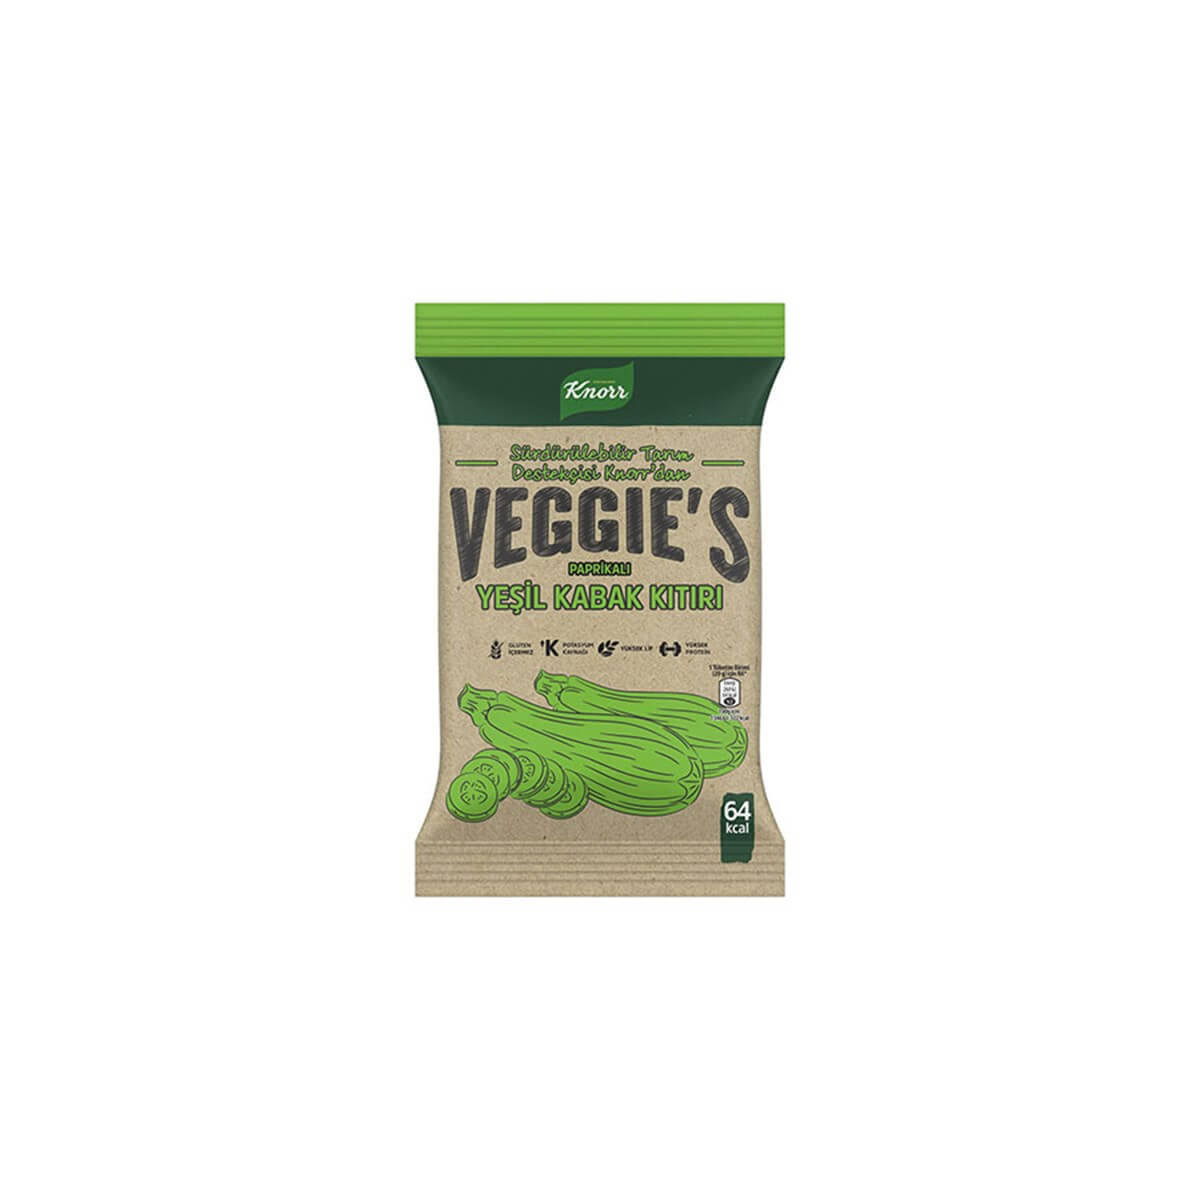 Knorr Veggie's Green Zucchini Crumbs with Paprika 20g - Shop Chips at  Baqqalia.com - Best Brands and Products - Free Worldwide Shipping Over $150